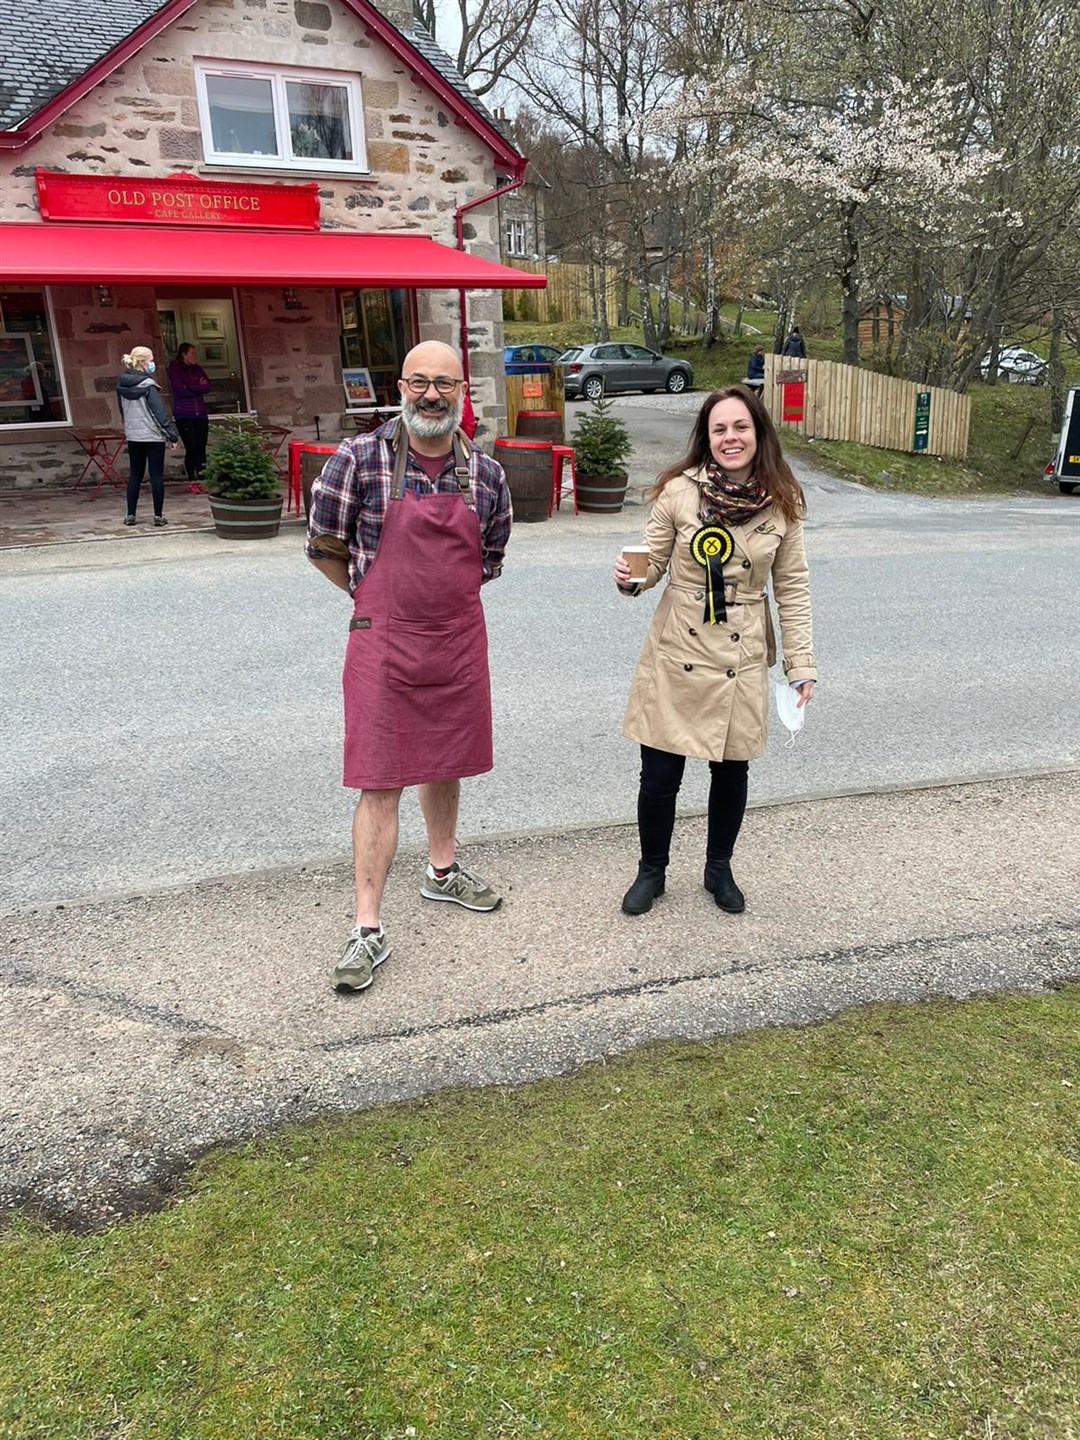 Kate Forbes with Toni Vastano, owner of The Old Post Office cafe in Kincraig.